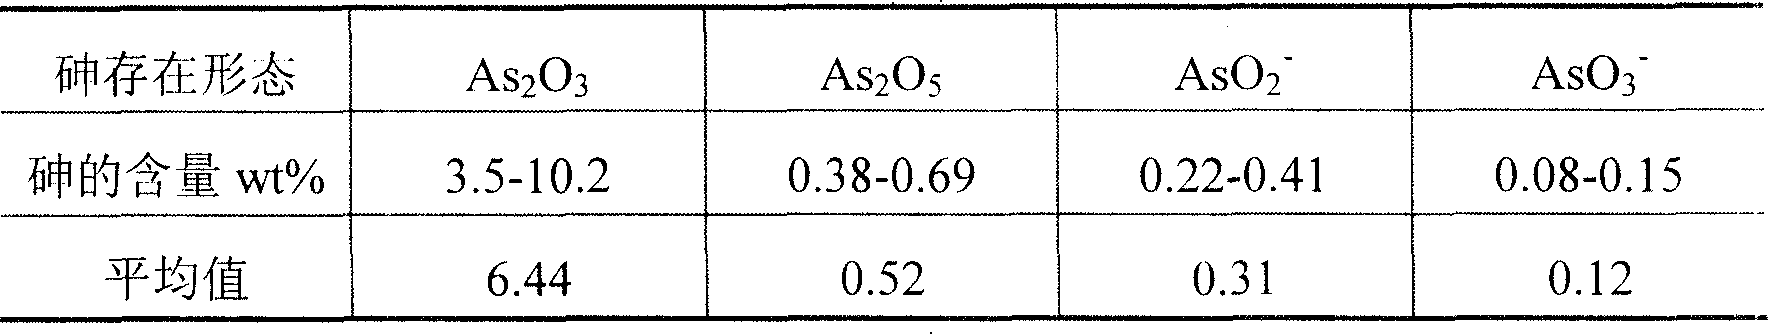 Method for removing arsenic from smoke containing arsenic trioxide